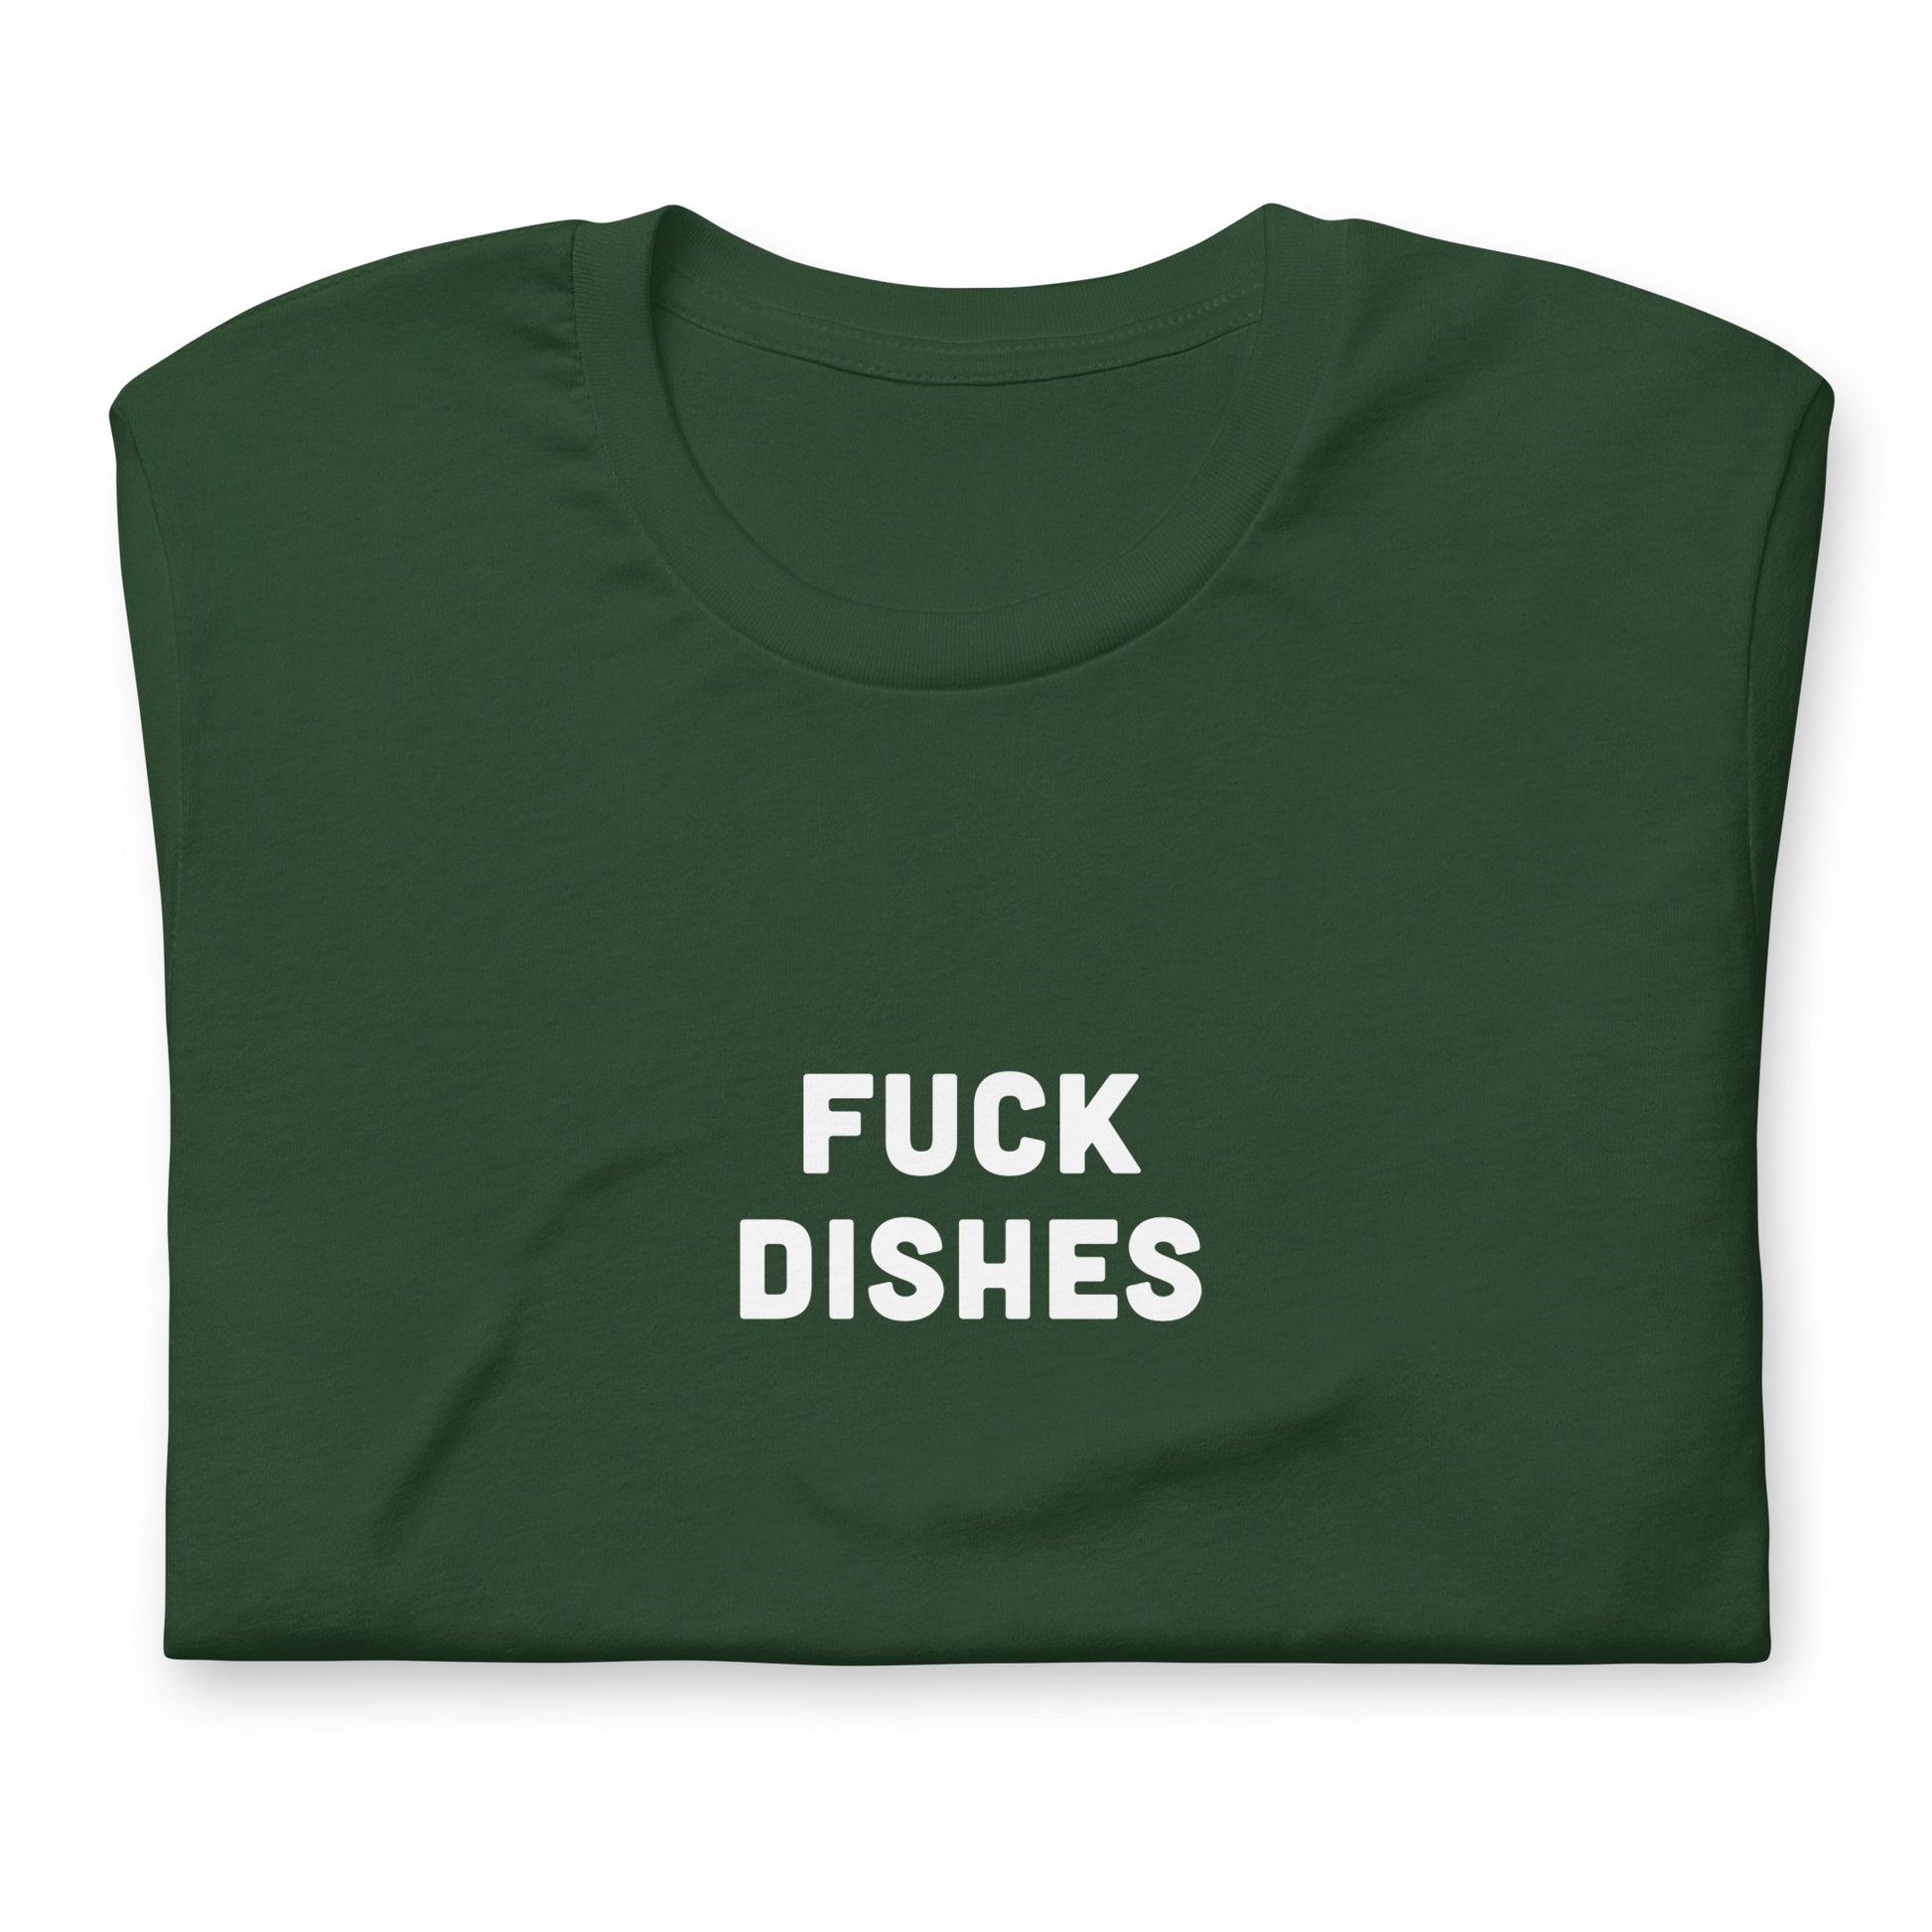 Fuck Dishes T-Shirt Size 2XL Color Black